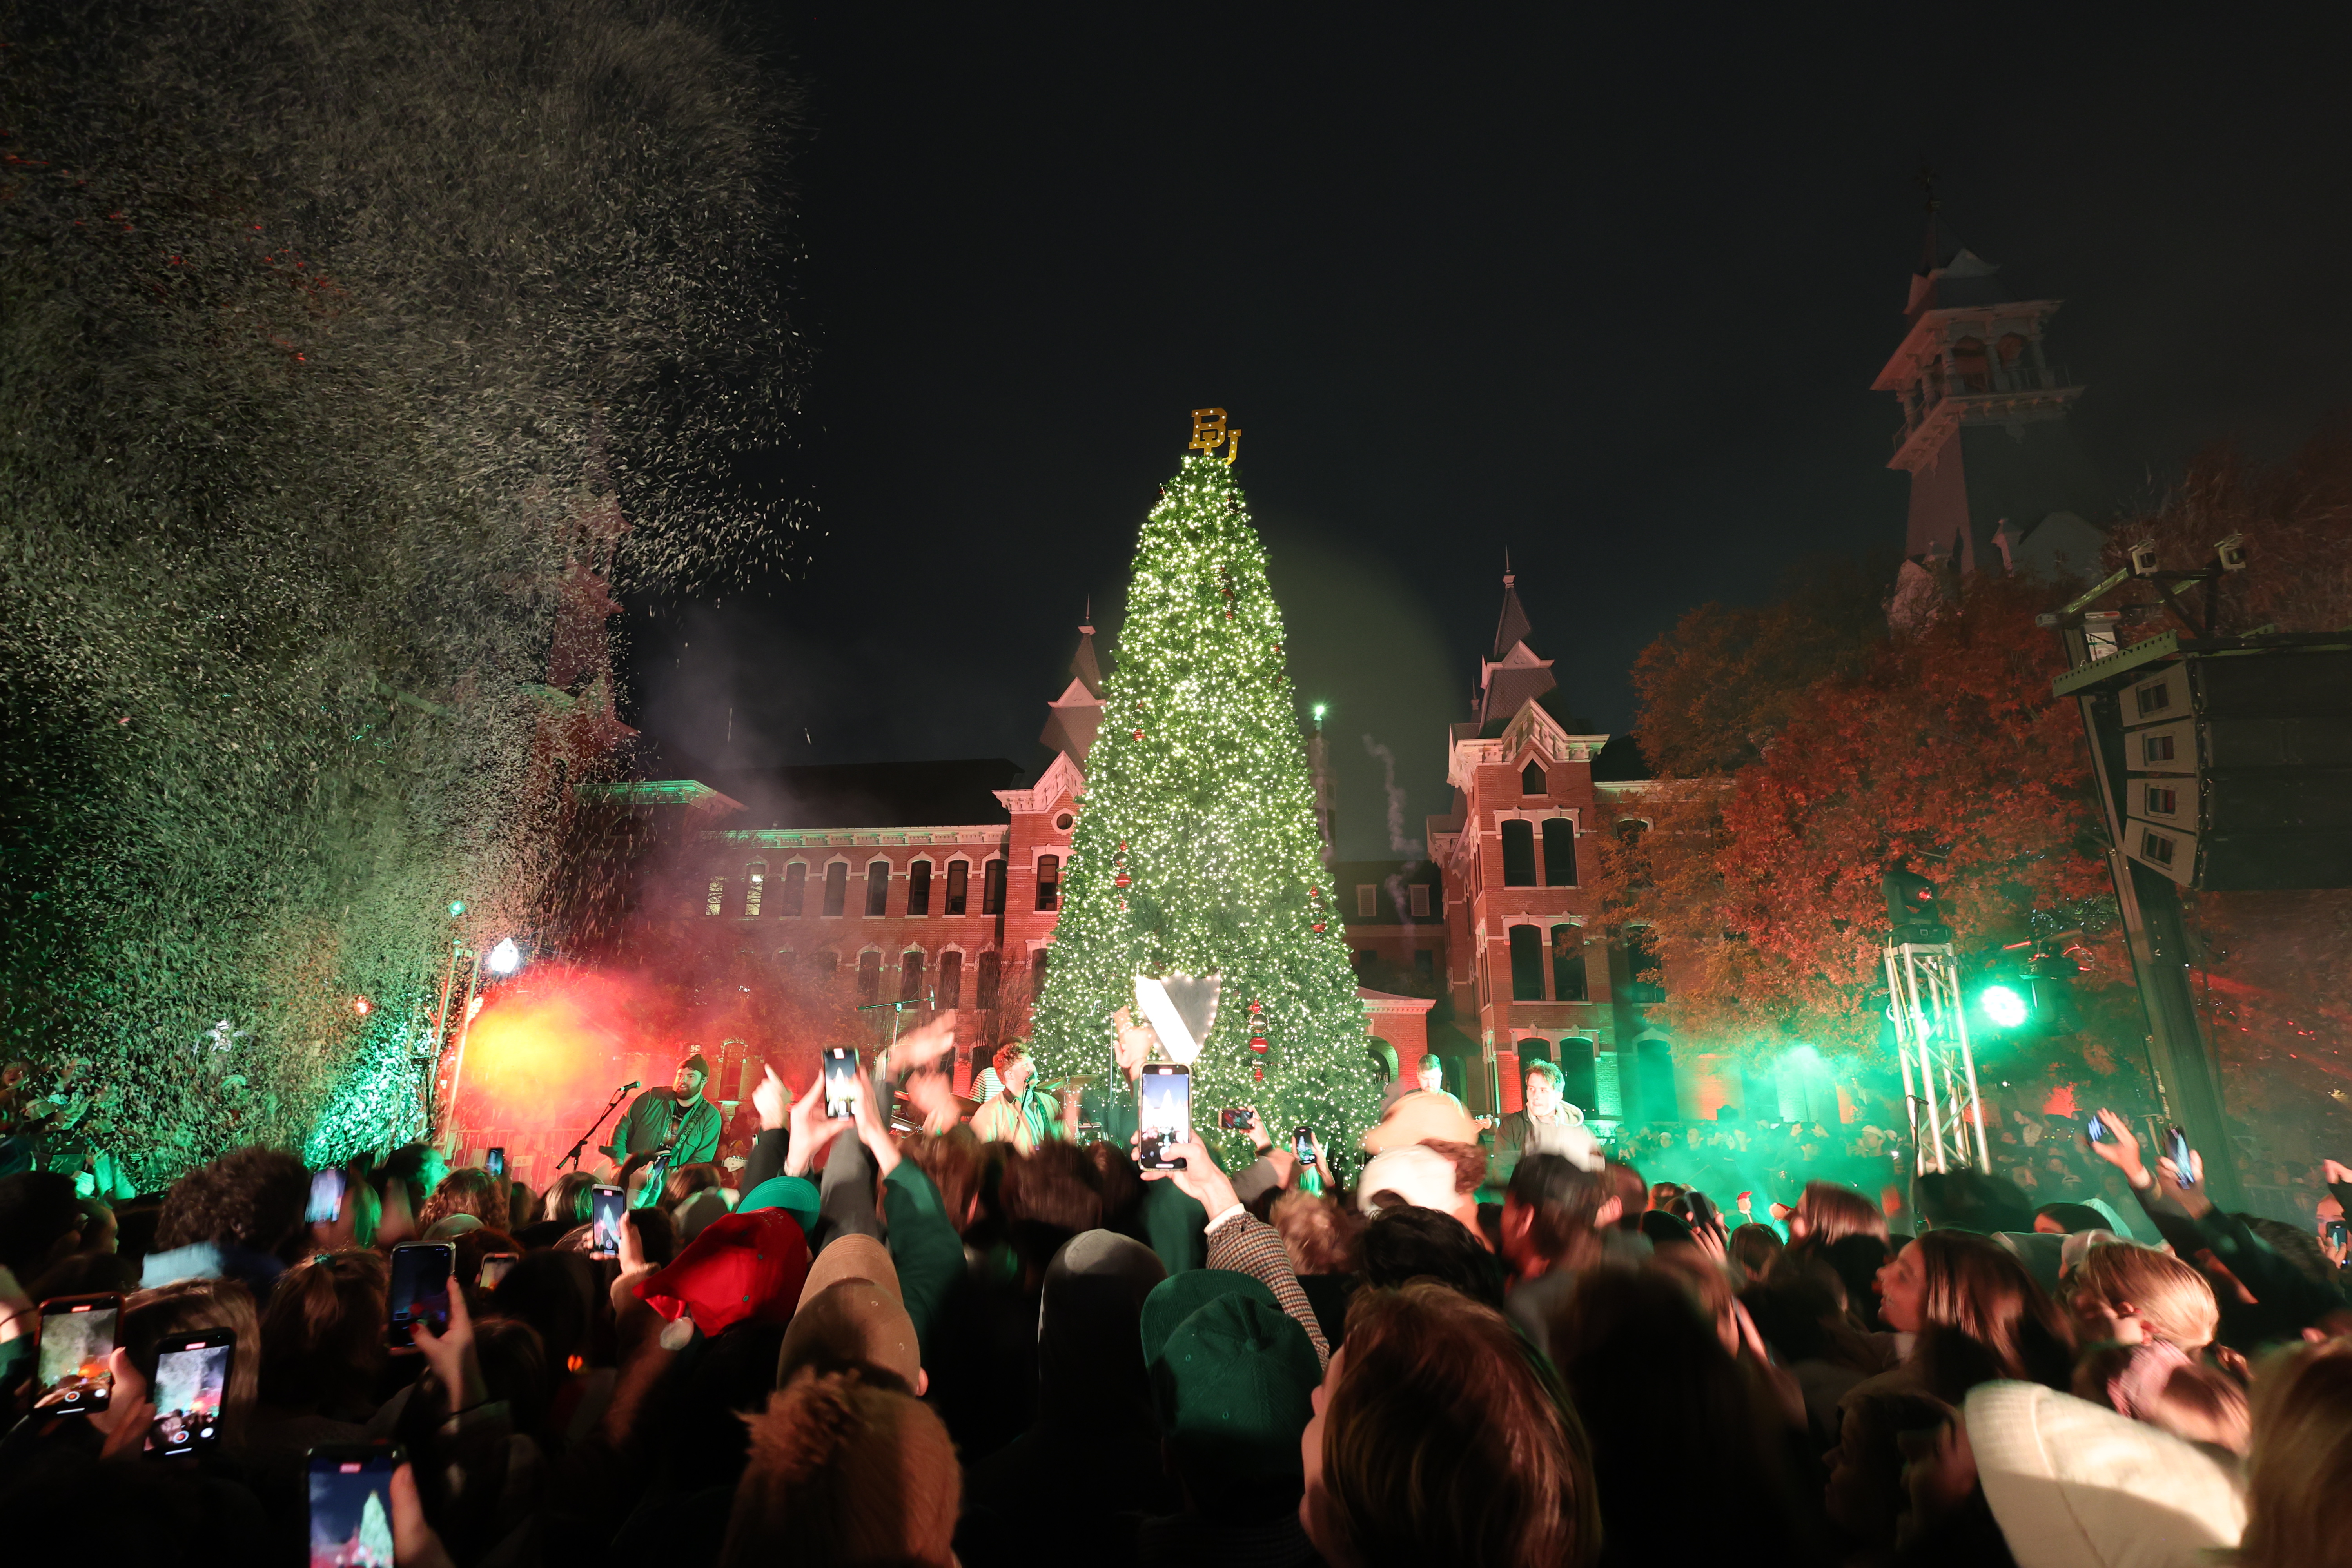 A large crowd dances in green and red lights before a large Christmas tree with the Baylor University symbol atop the tree.